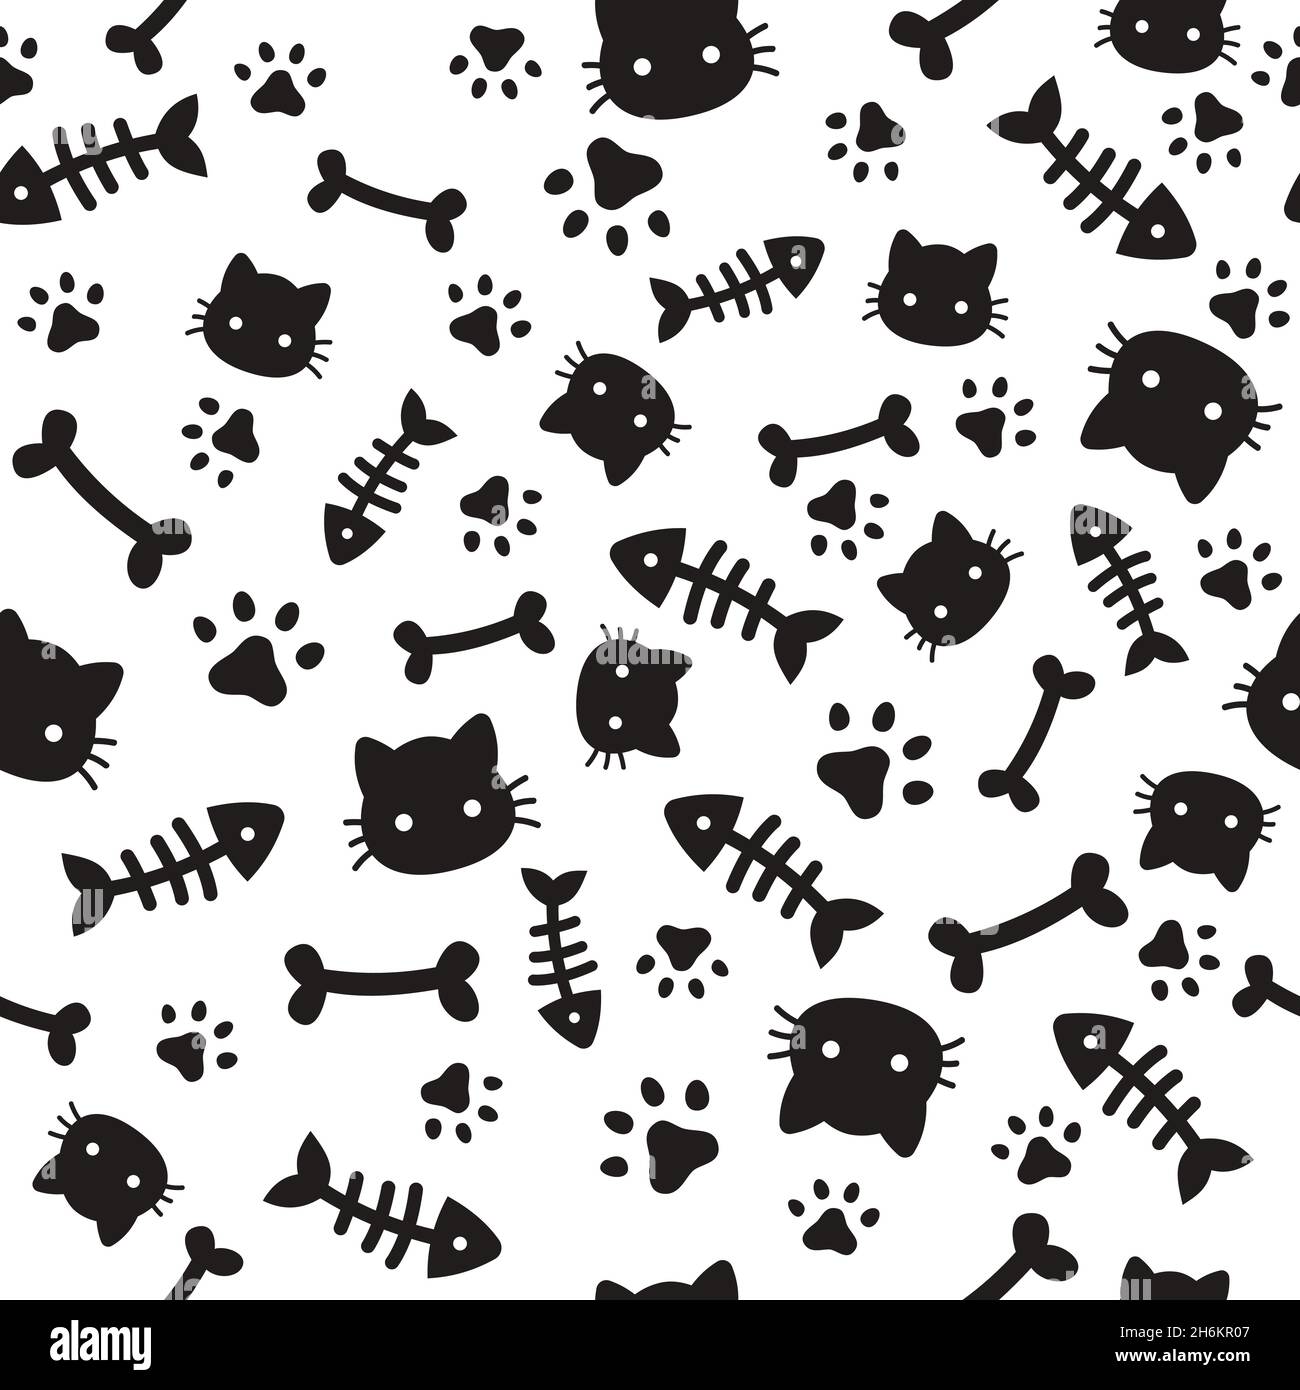 Paw seamless pattern. Animal footprints and bones. Cat dog paws wallpaper, cute puppy pet cartoon vector background Stock Vector